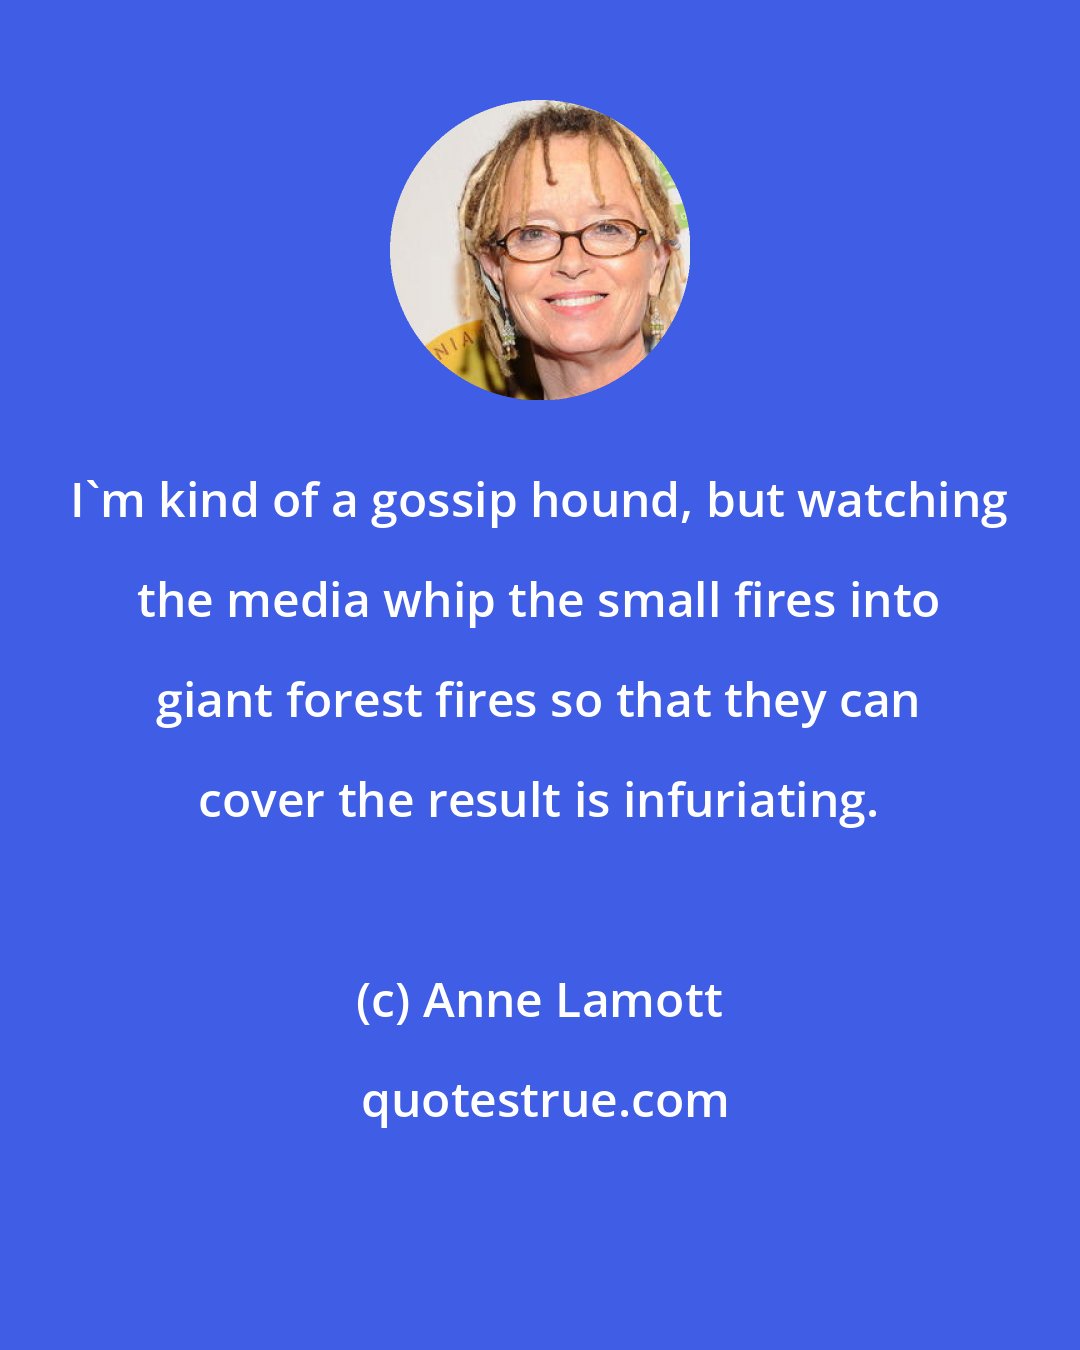 Anne Lamott: I'm kind of a gossip hound, but watching the media whip the small fires into giant forest fires so that they can cover the result is infuriating.